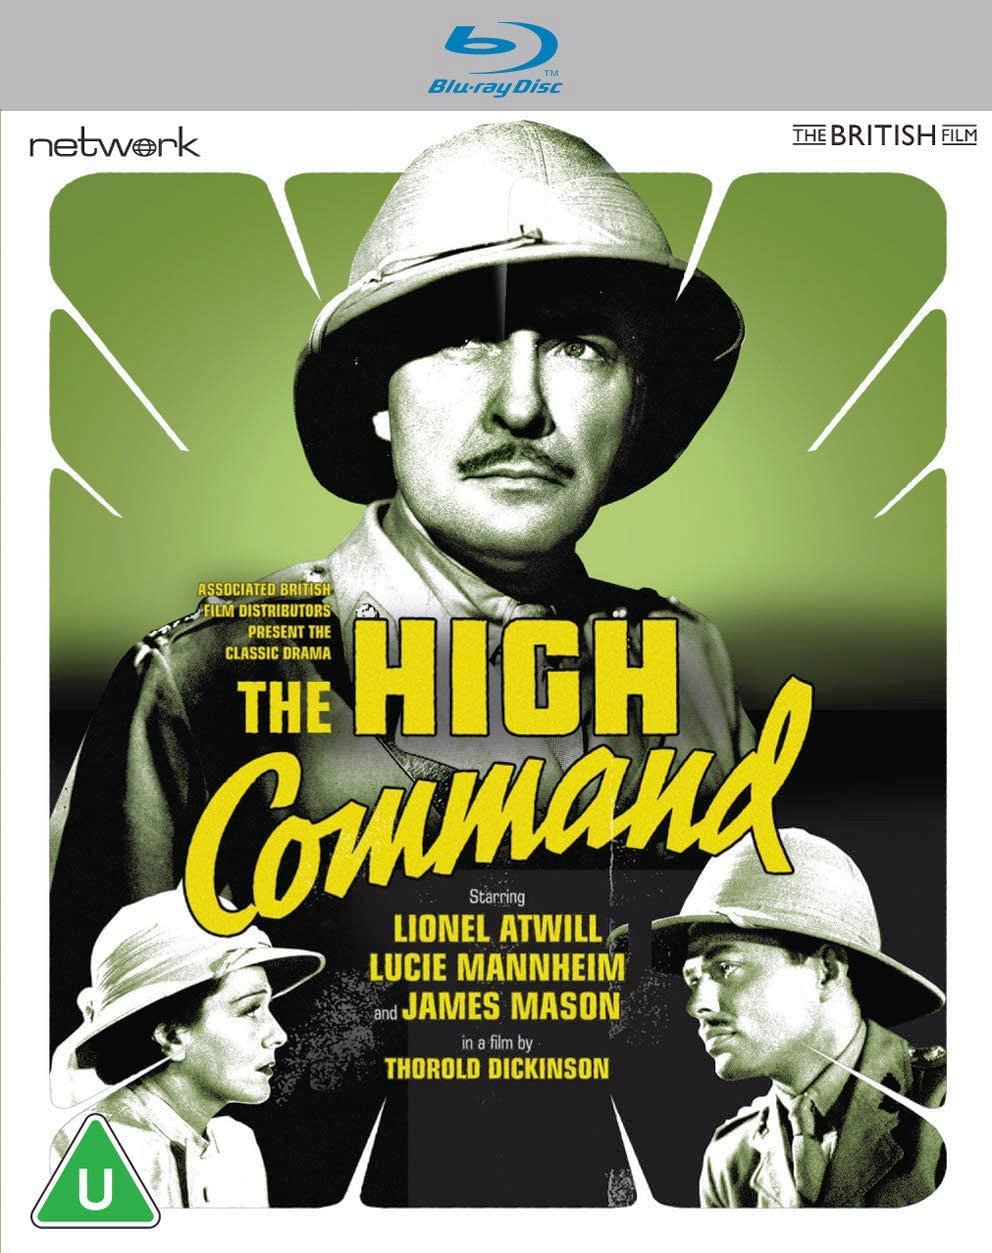 The High Command (1937) Blu-ray cover from Network Distributing and the British Film [2021] (1)